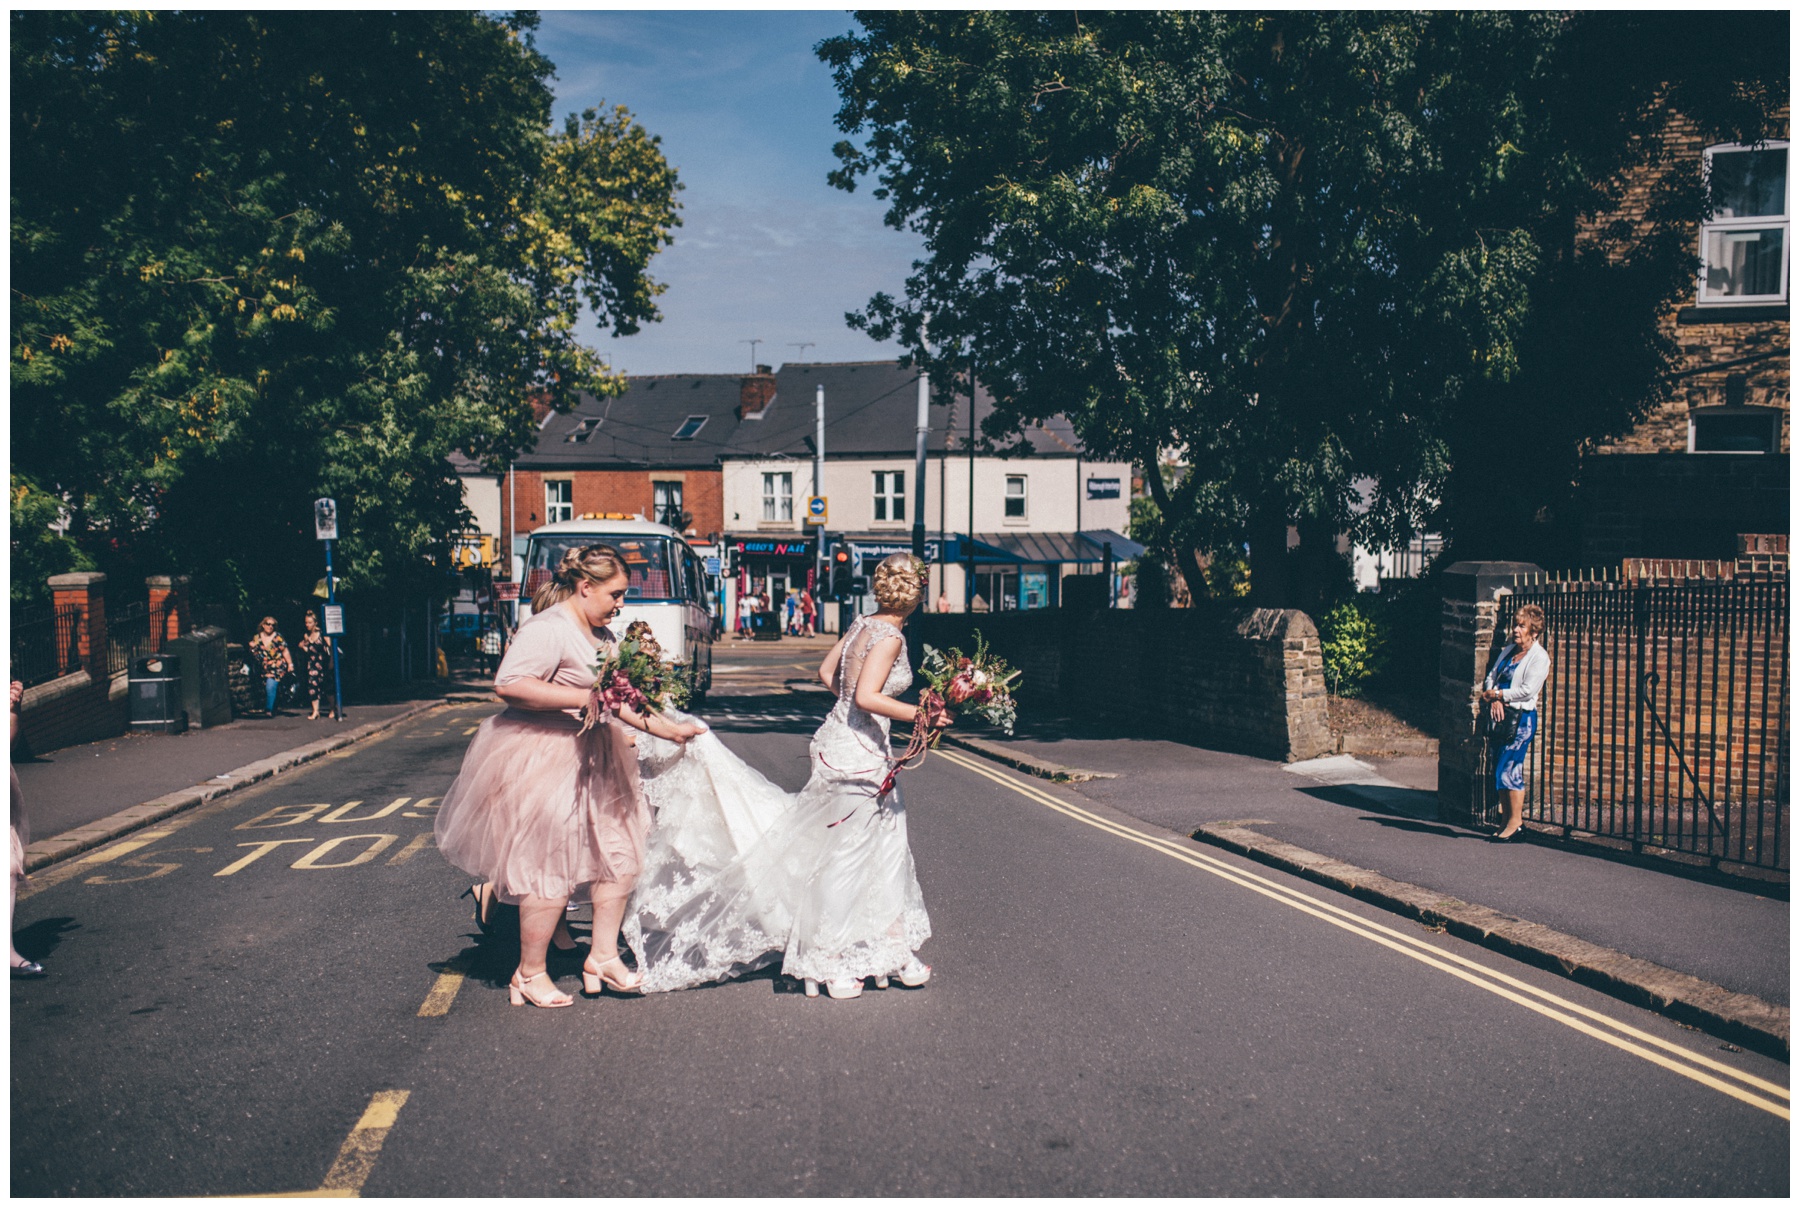 Bride gets helped across the busy city road by her bridesmaids.